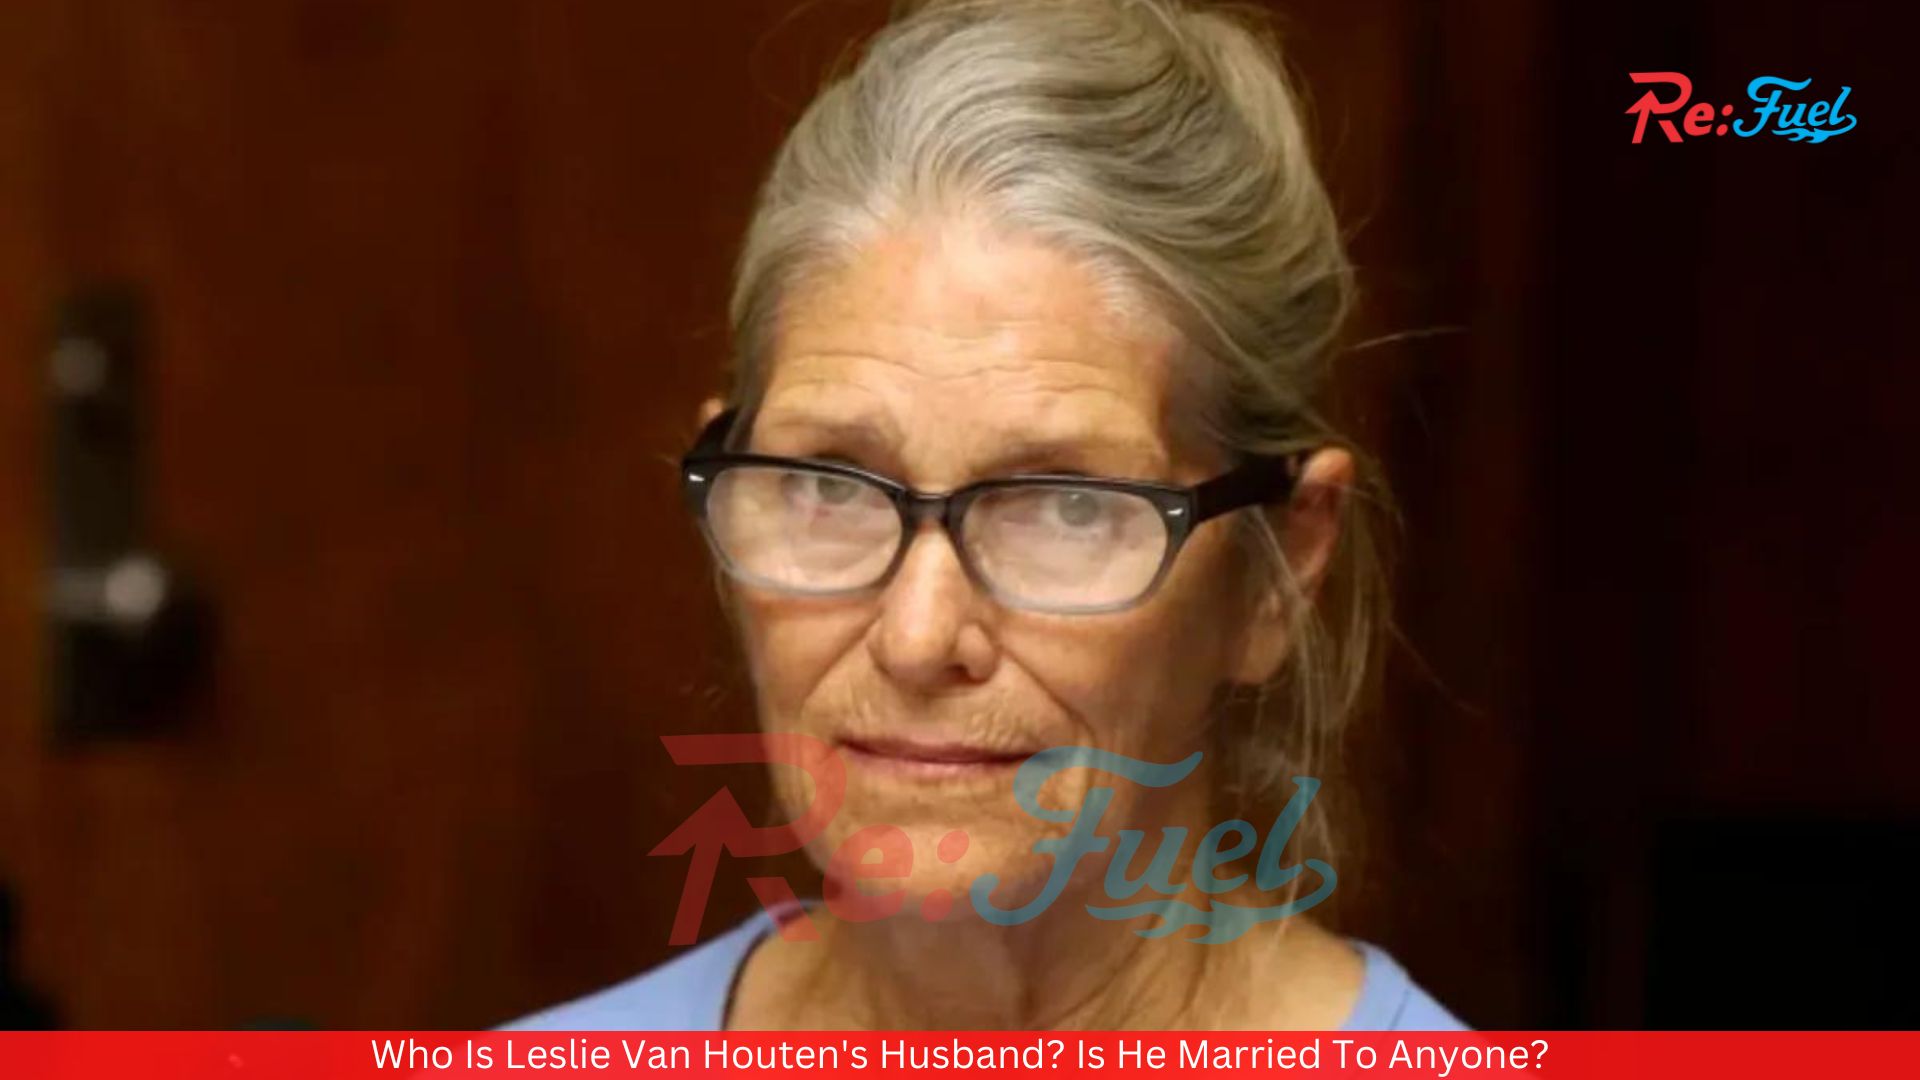 Who Is Leslie Van Houten's Husband? Is He Married To Anyone?